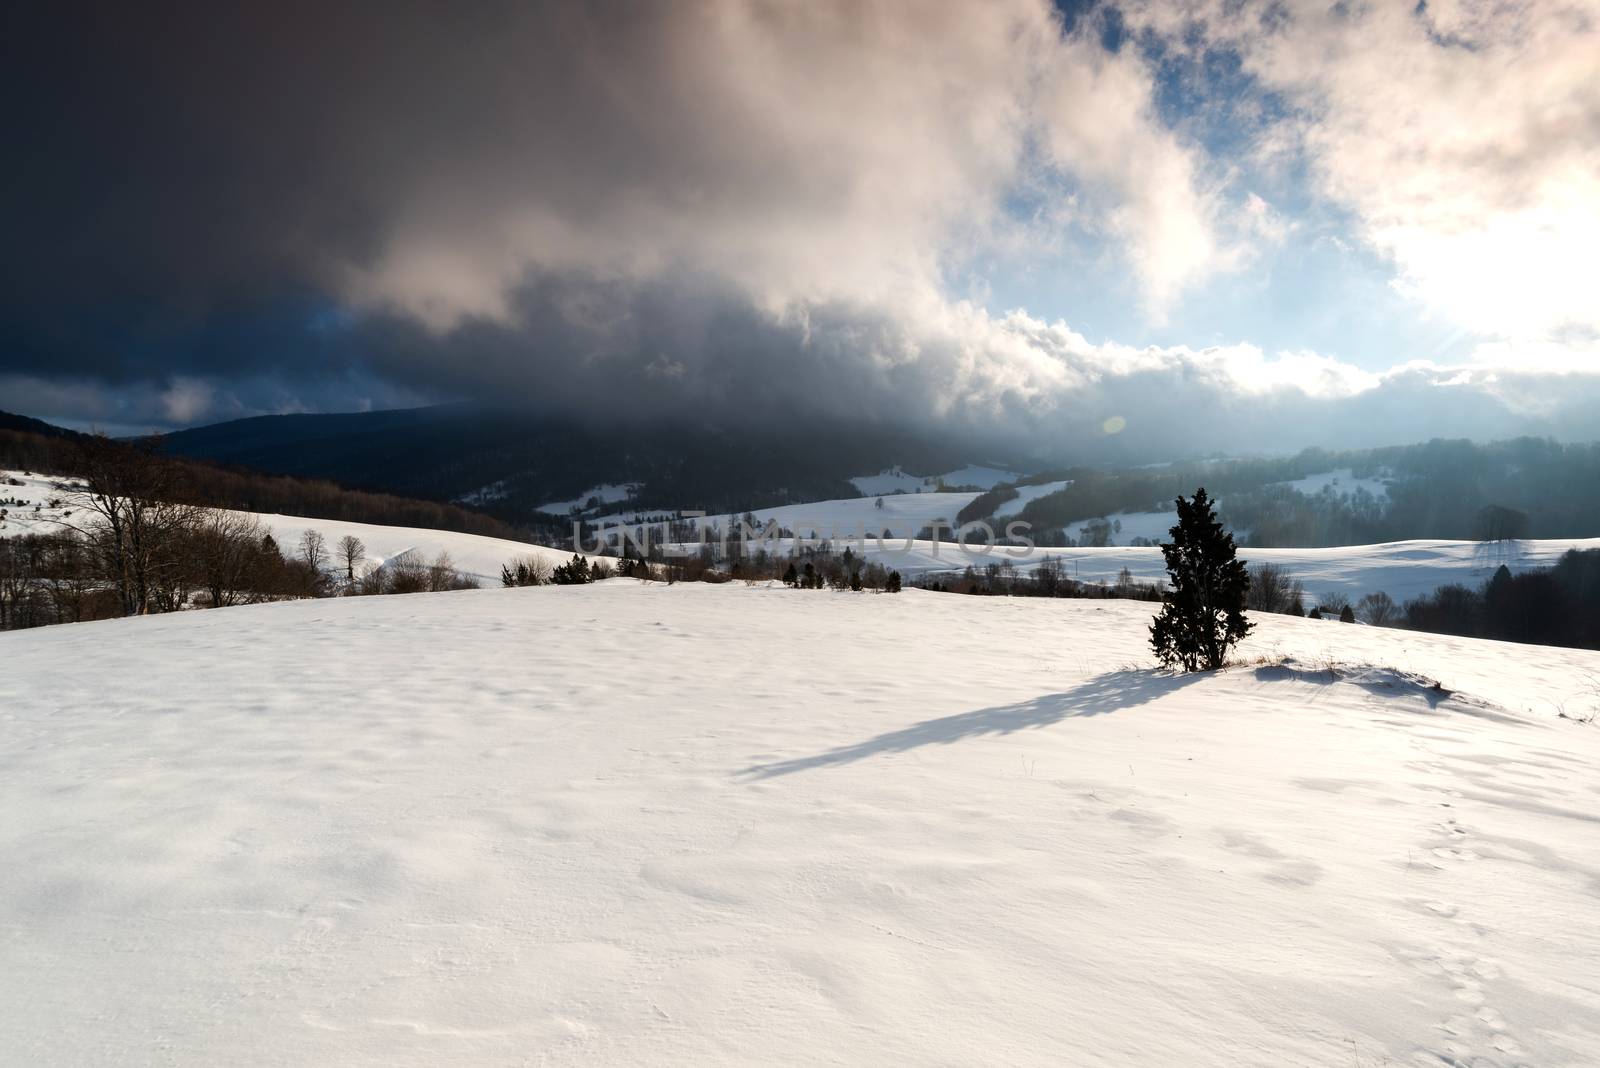 Winter Sunrise over Snow Covered Polonina in Bieszczady Mountains in Poland.